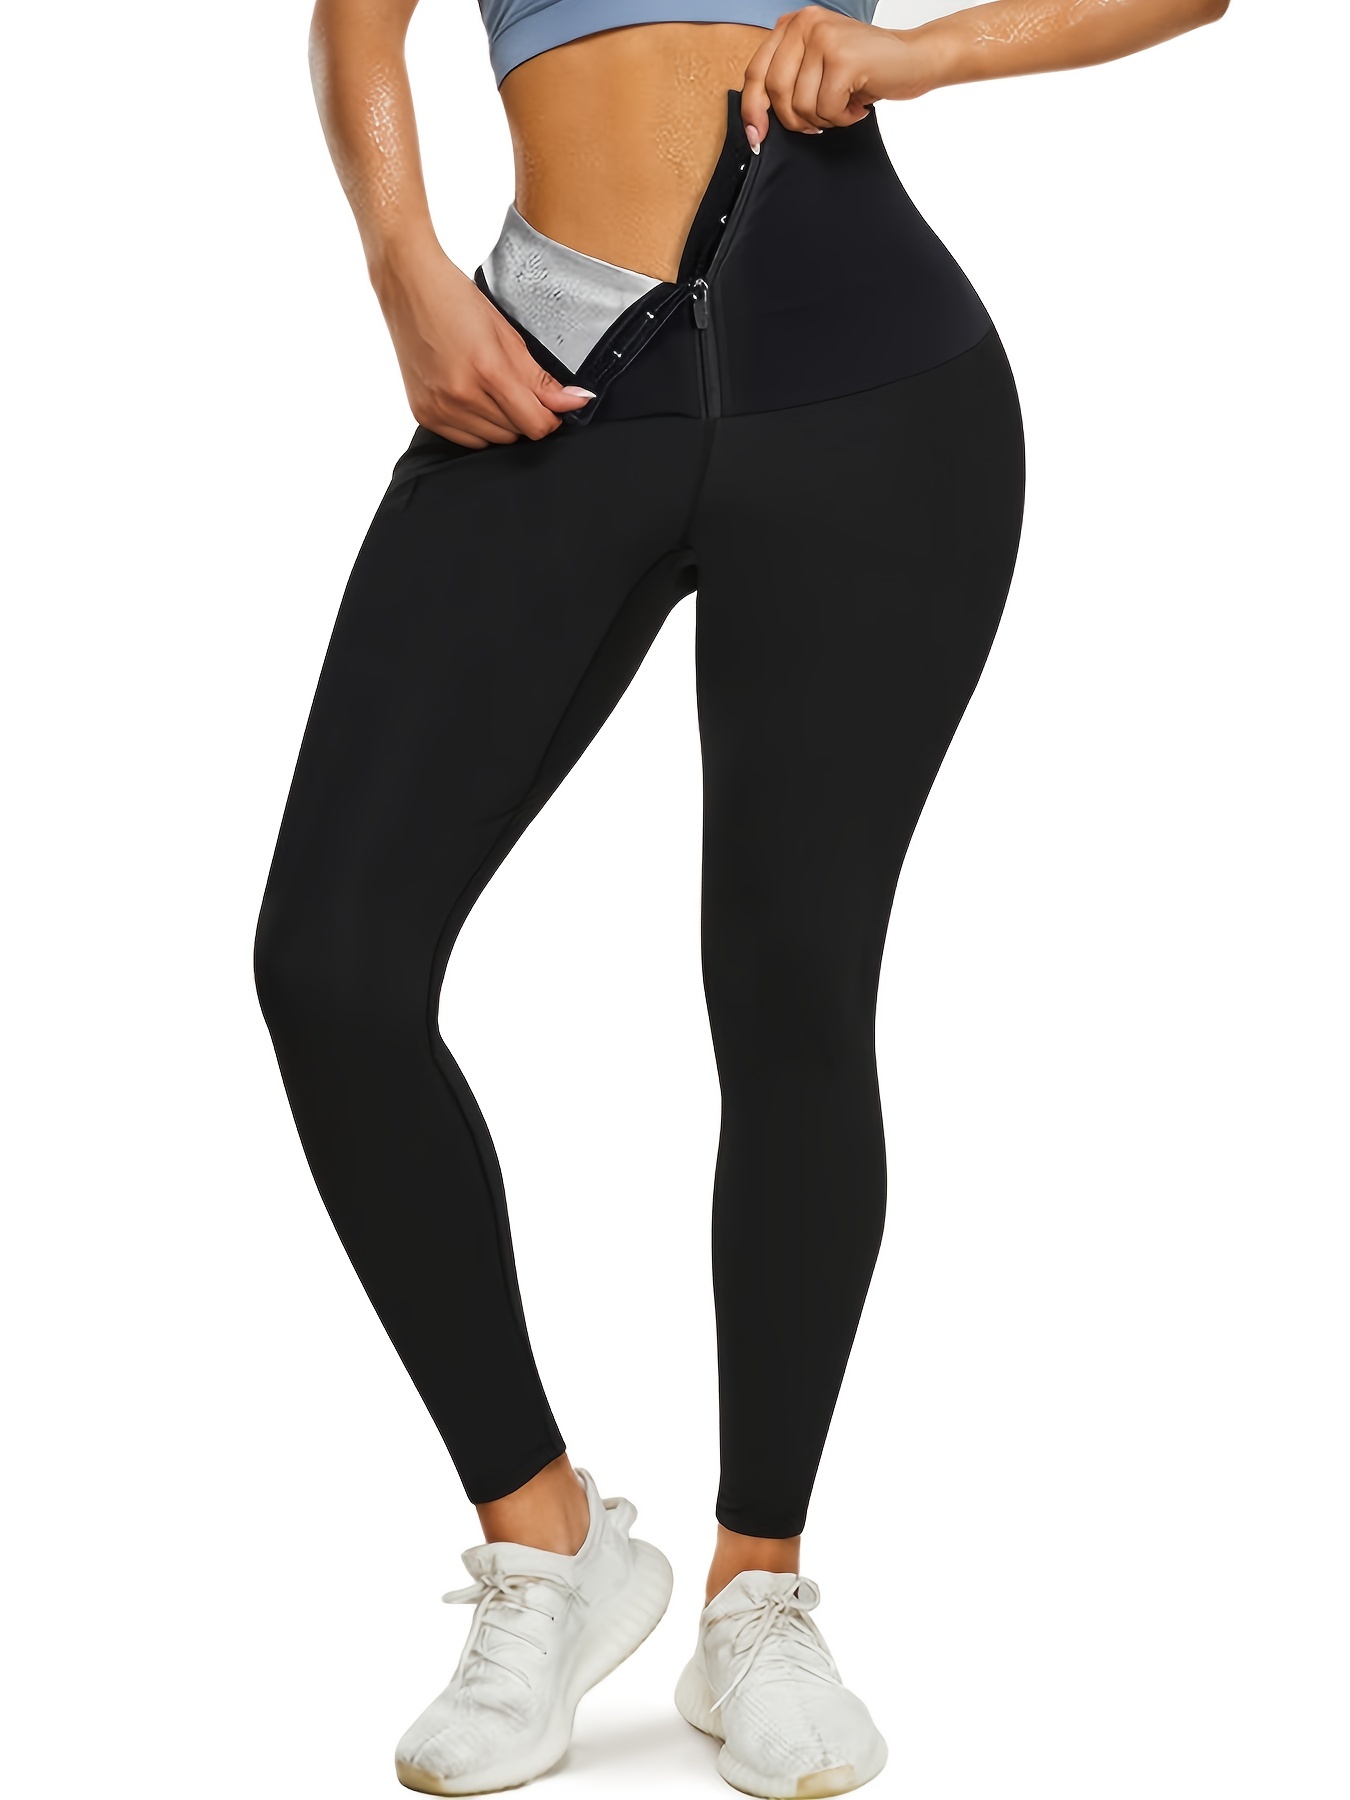 L) Womens Thermo Body Shaper Pants- Hot Slimming Compression